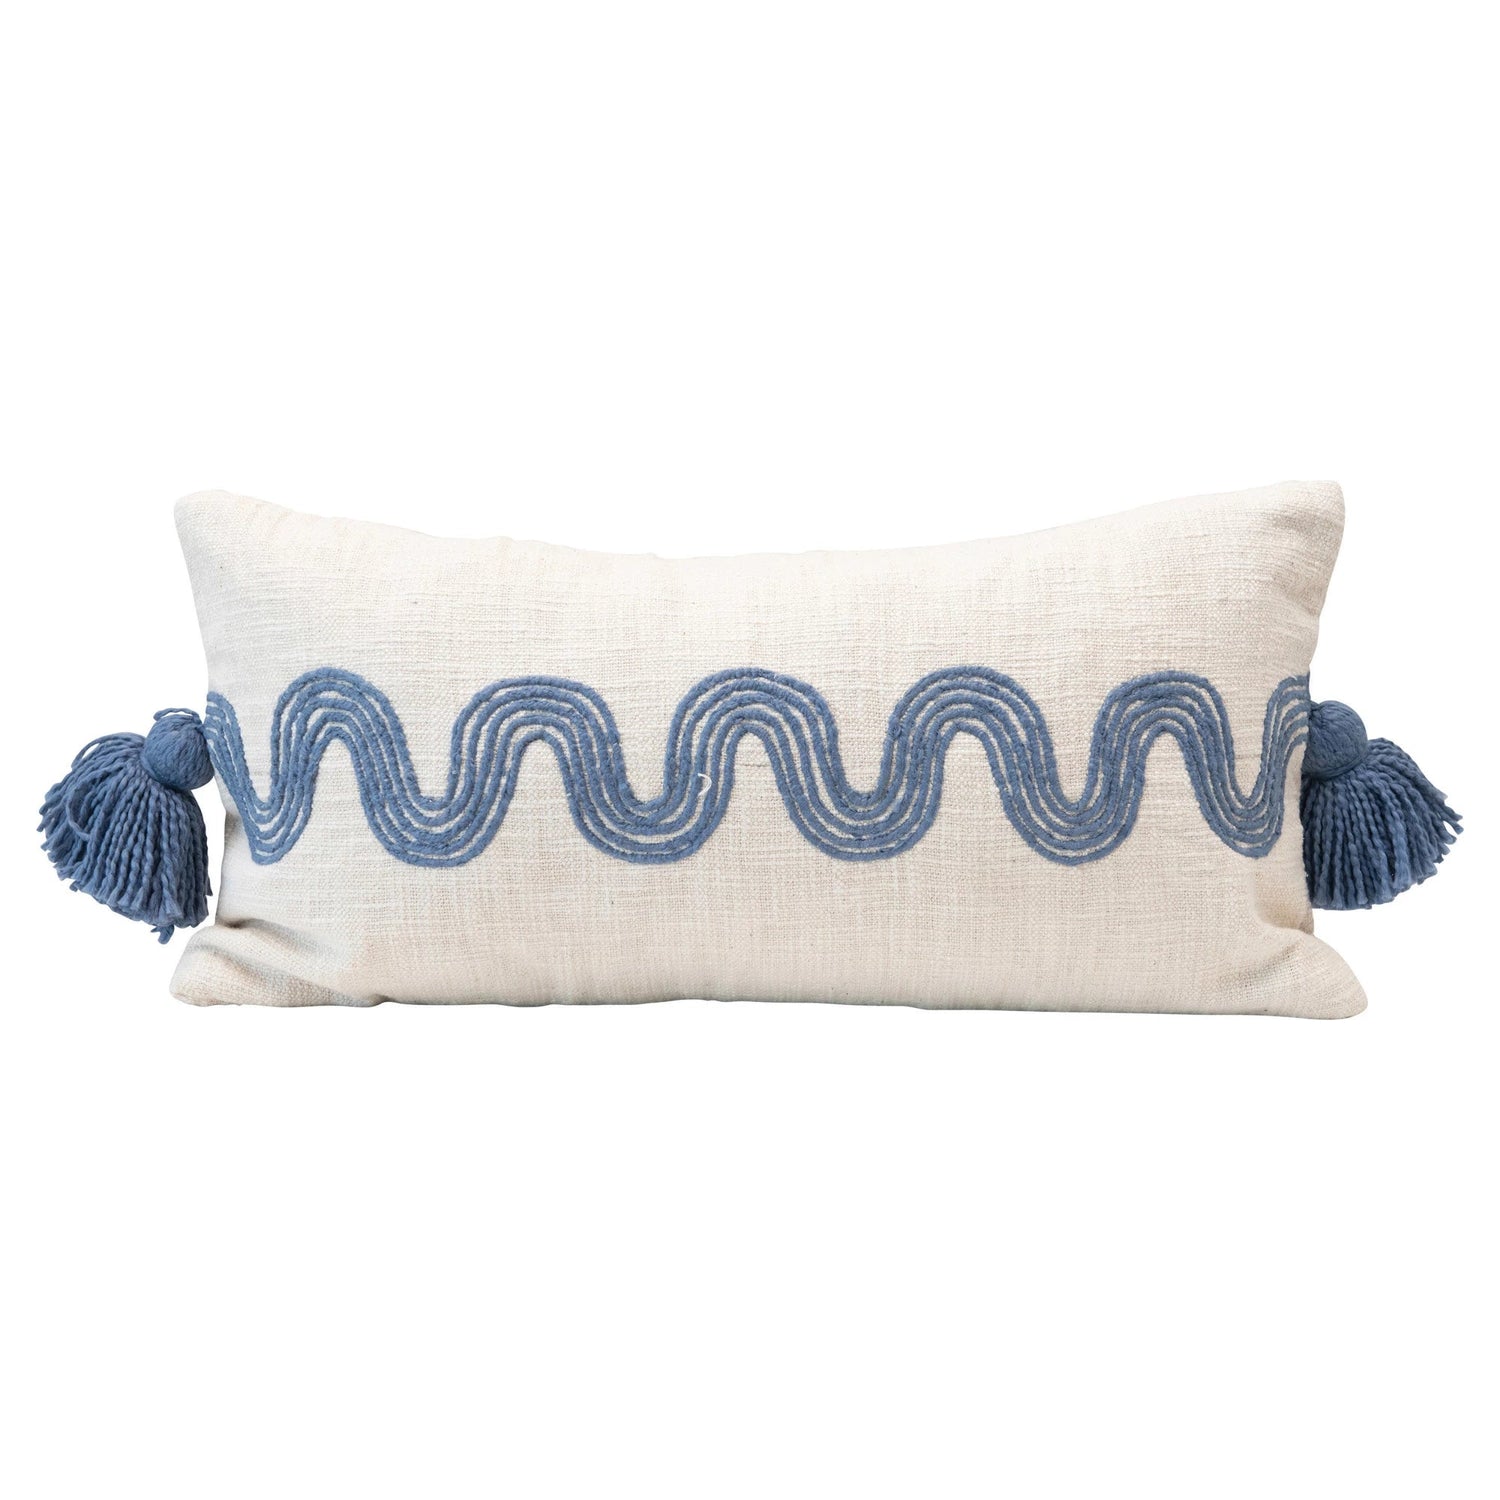 Lumbar Pillow with Curved Pattern & Tassels - The Riviera Towel Company